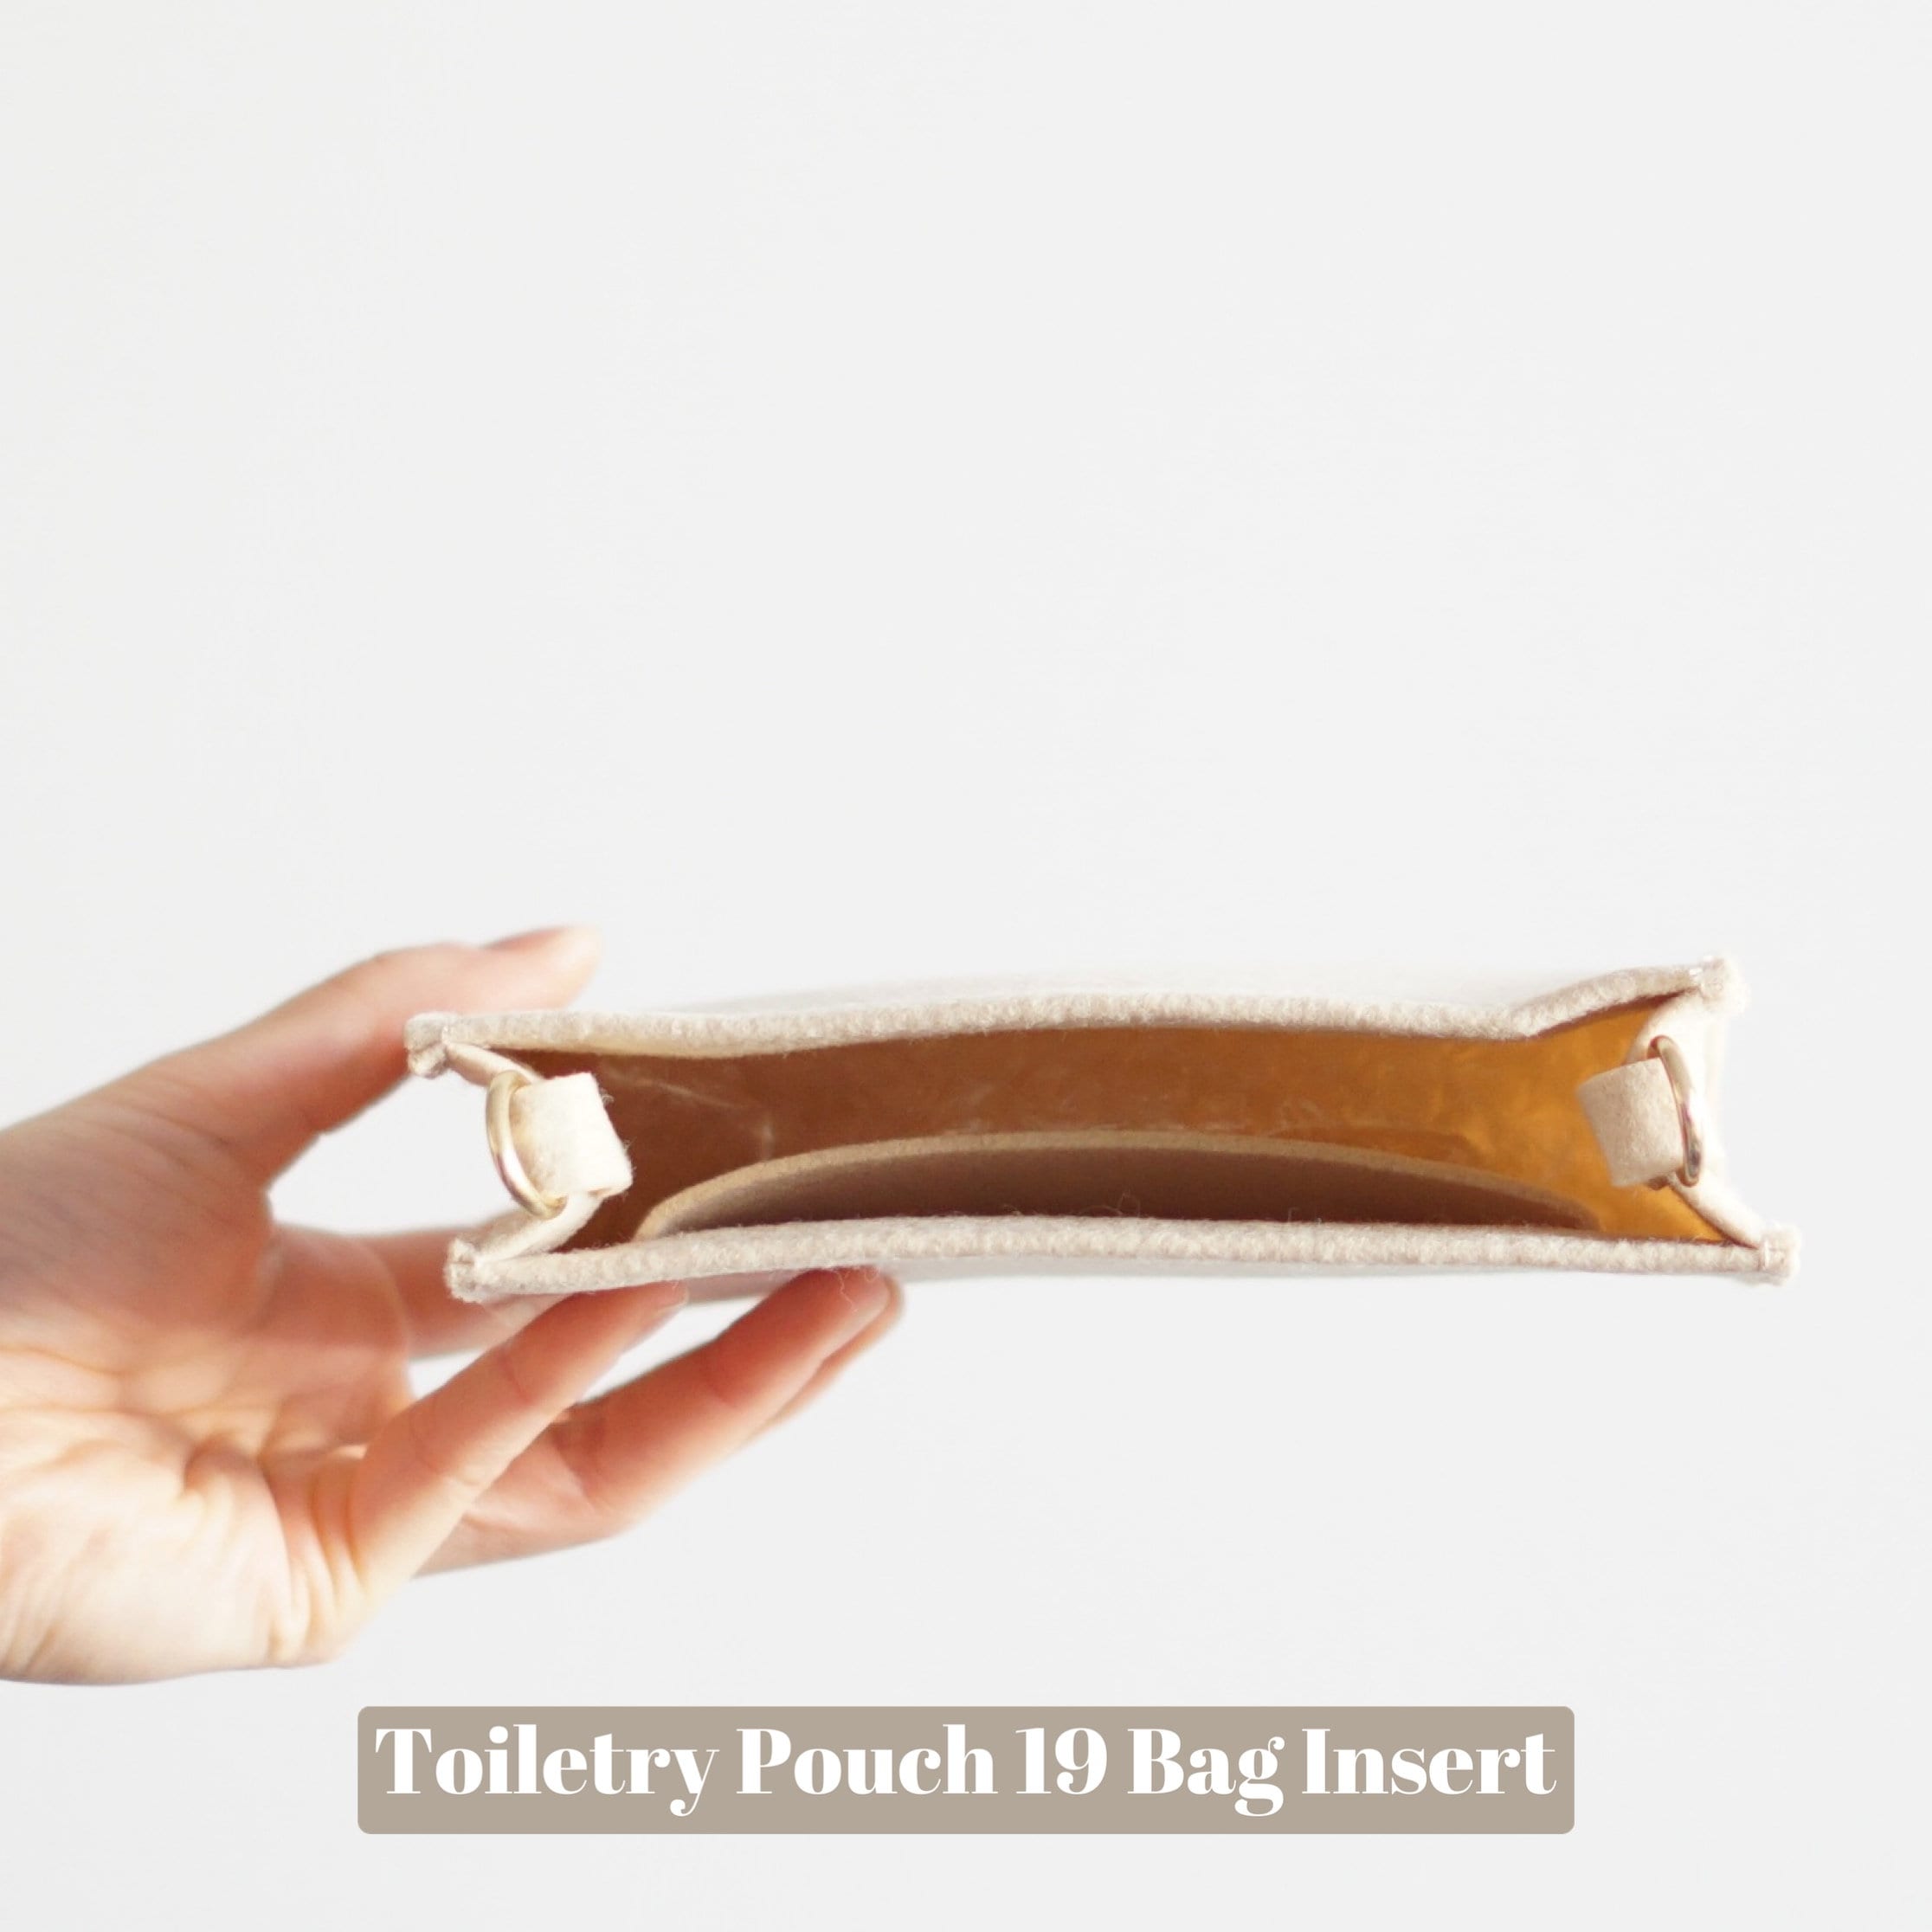 Buy Toiletry Pouch 26 Bag Insert Conversion Kit Organizer Shaper Online in  India 